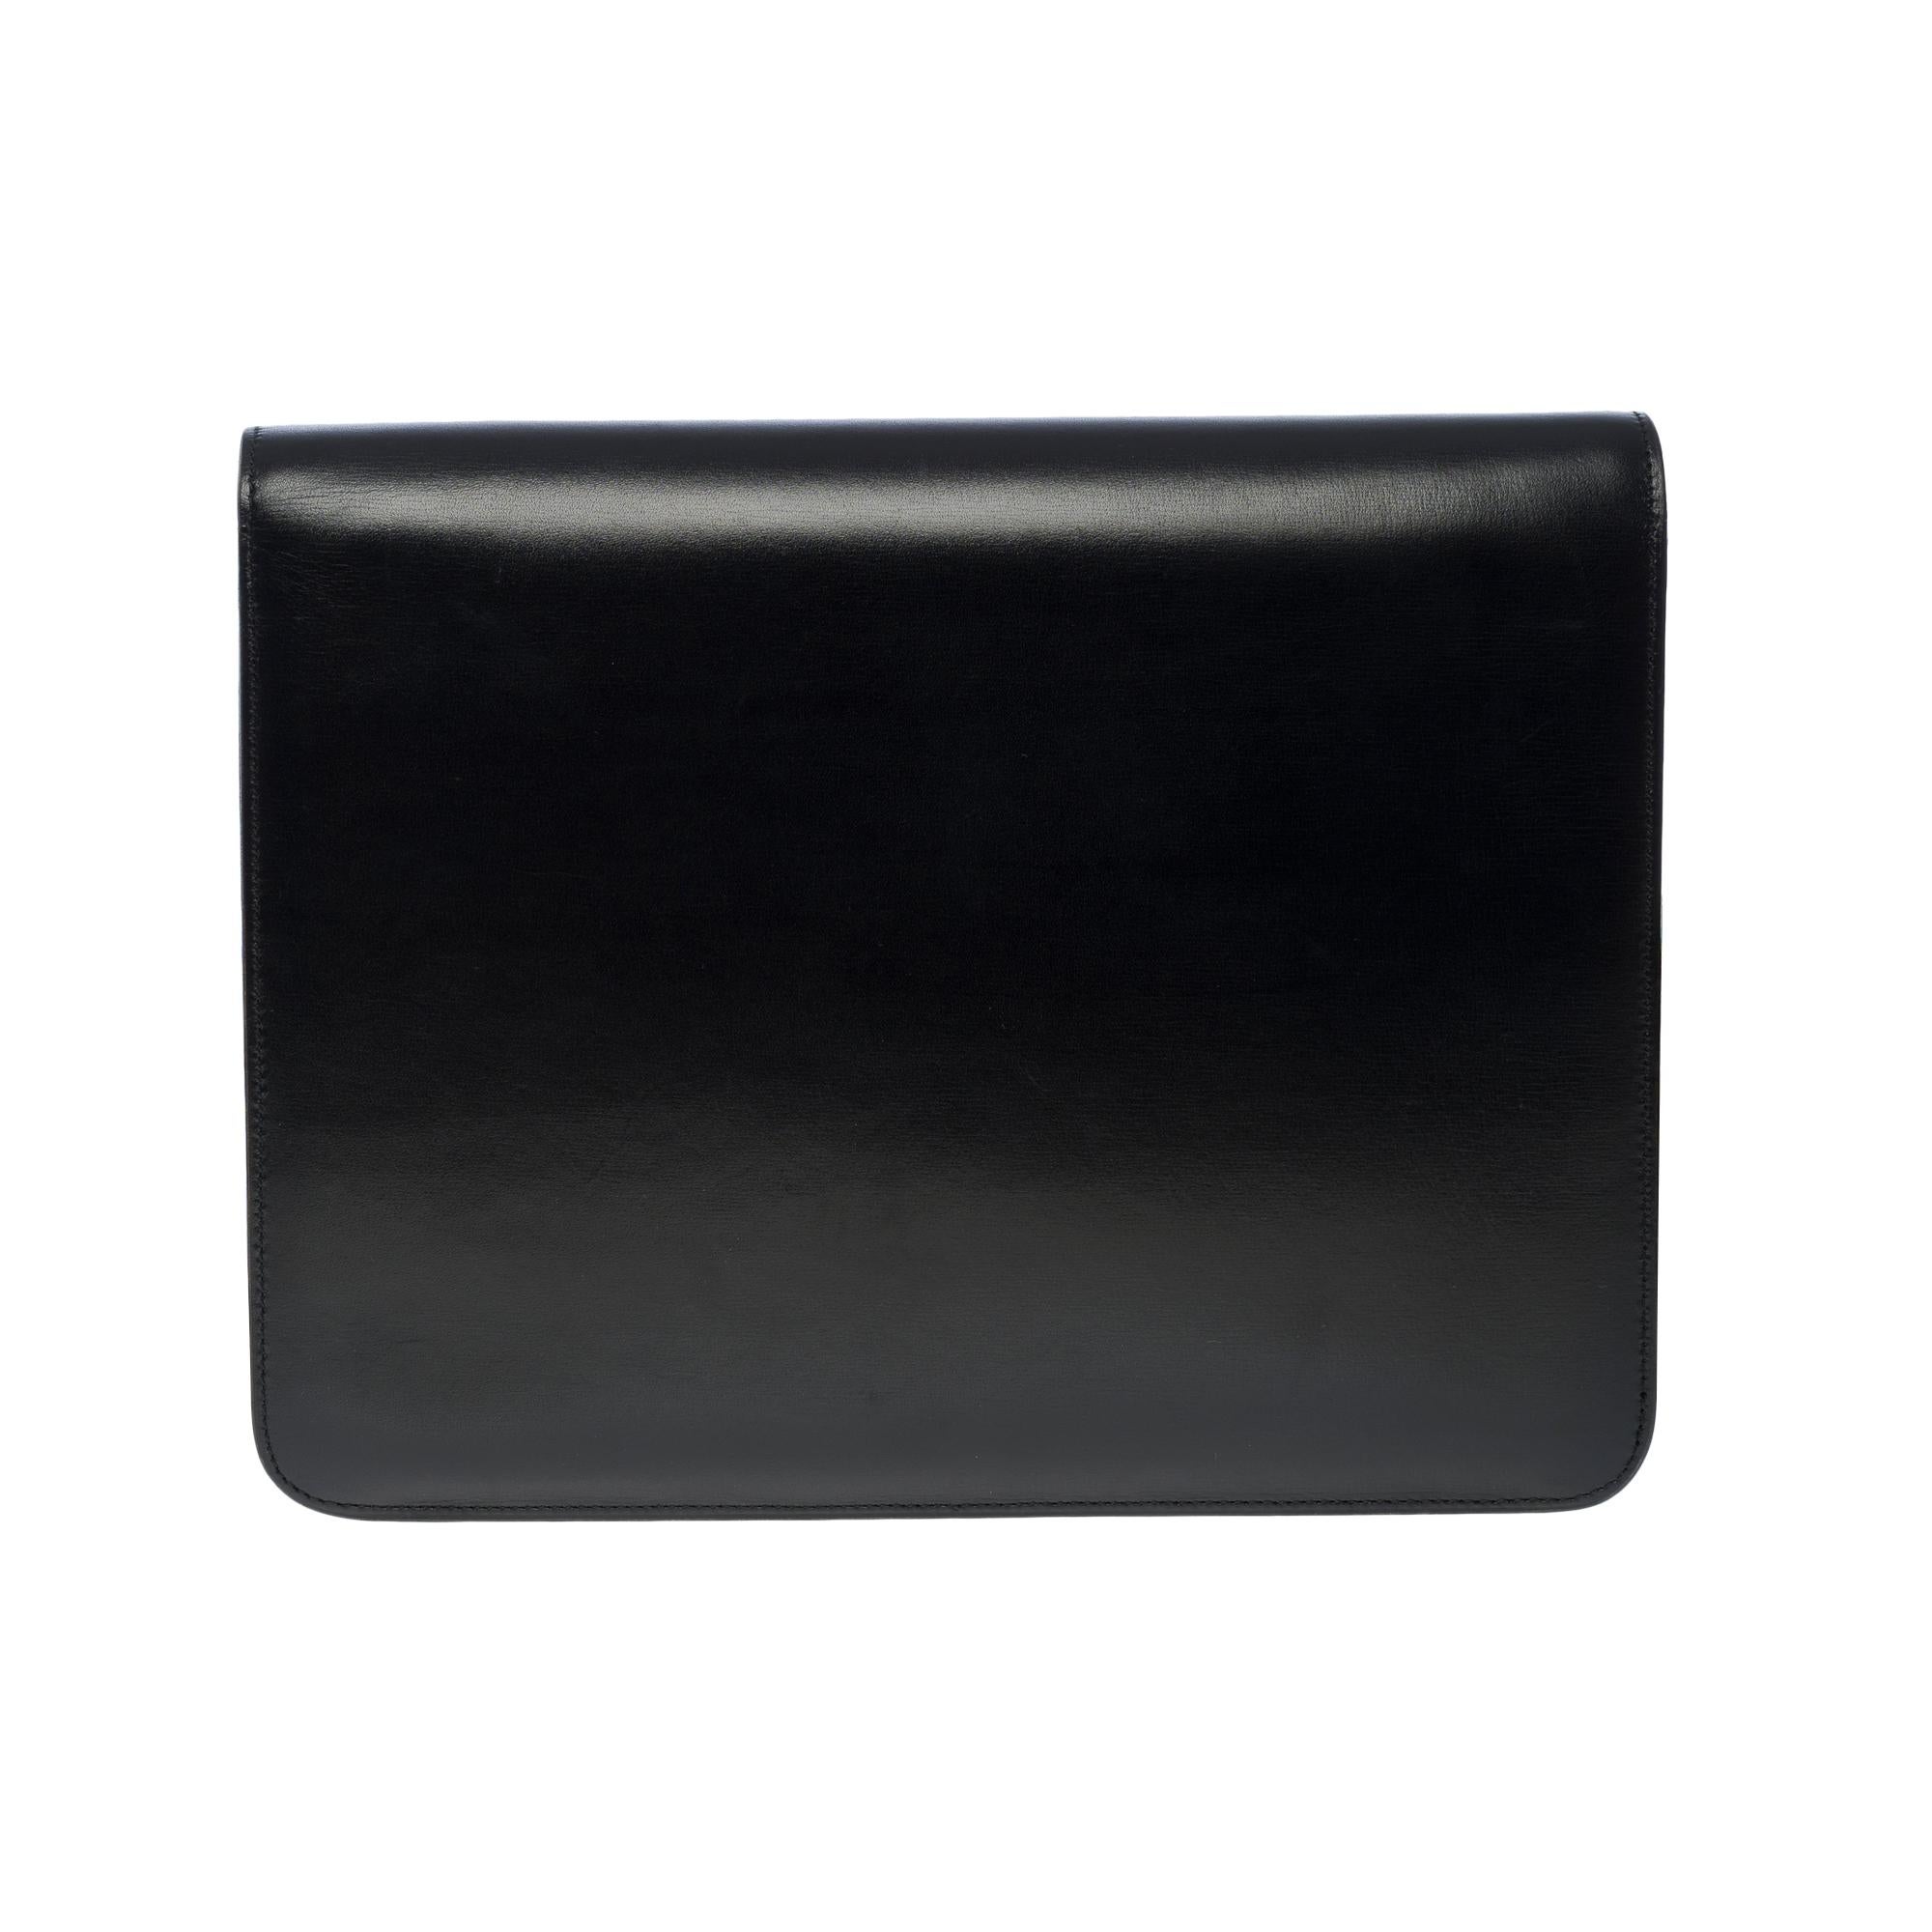 Gorgeous Chanel Classic shoulder flap bag in black box calfskin leather, GHW 8